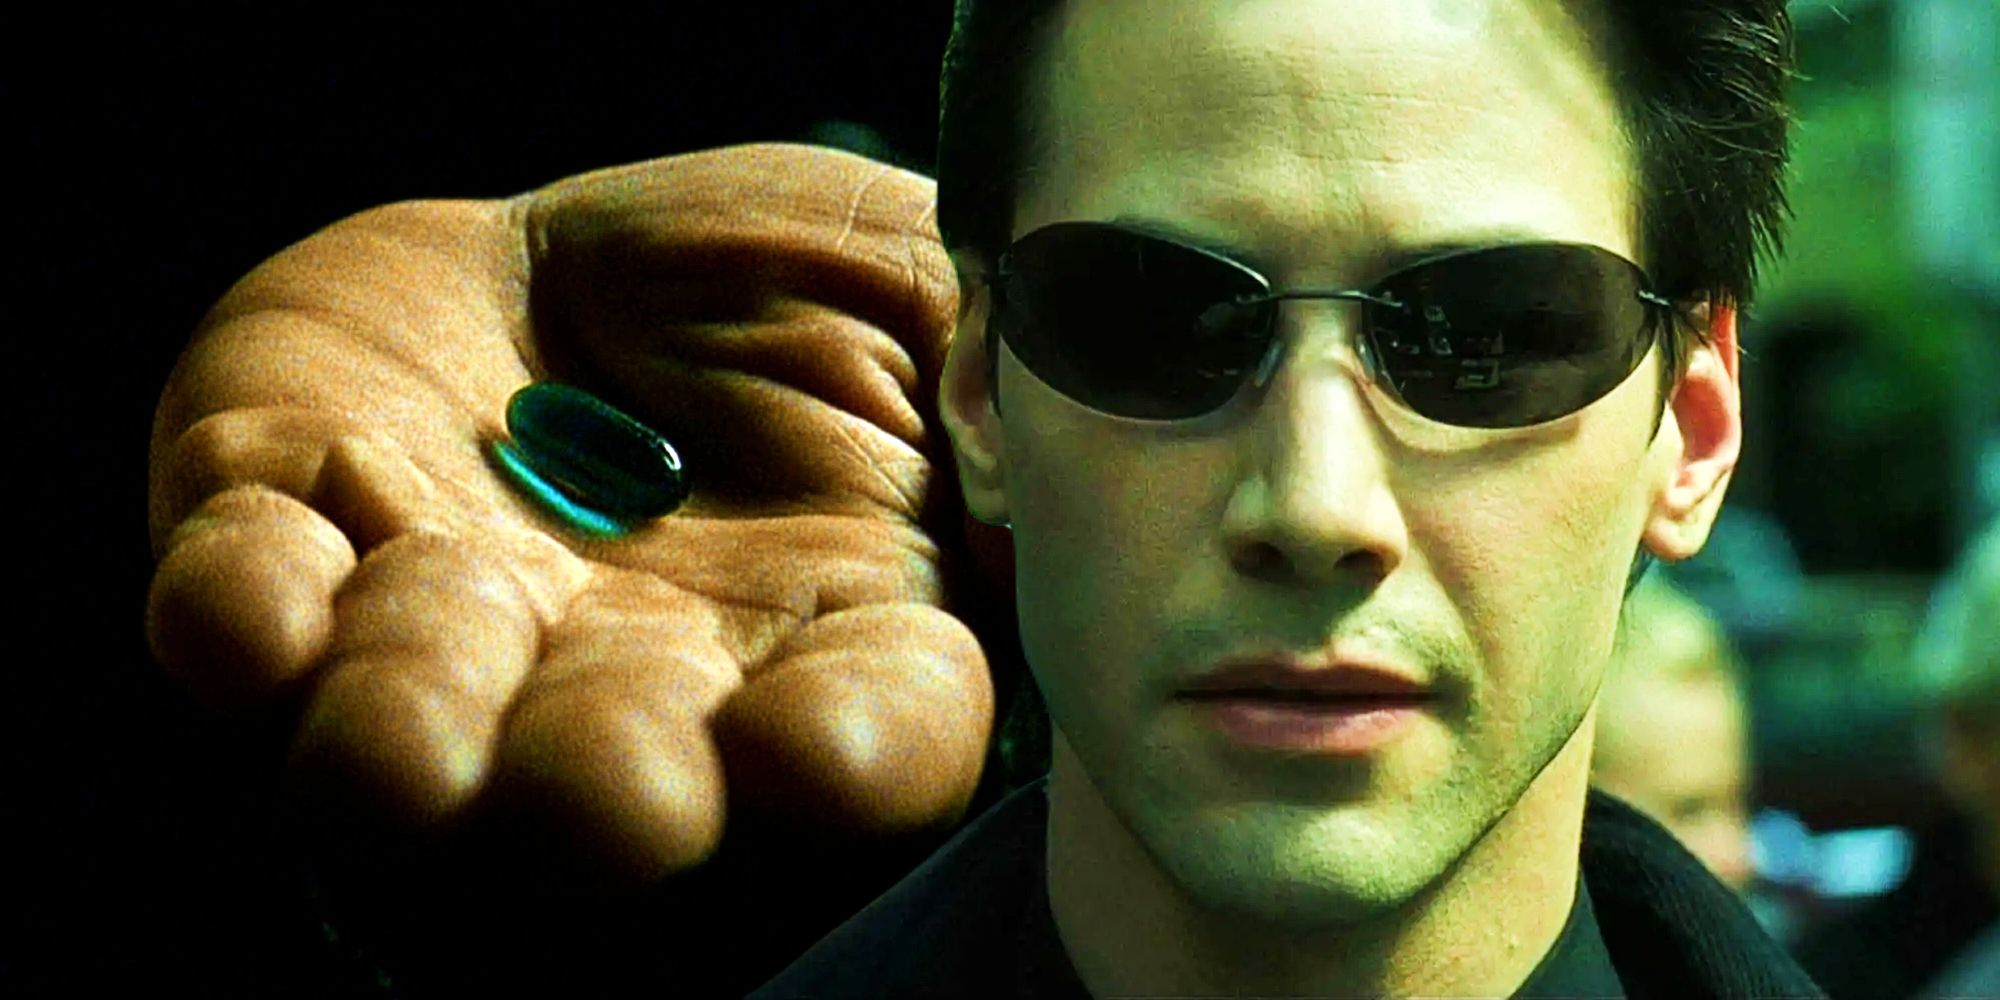 Why Is Neo Special? What Makes Him The Matrix’s One?